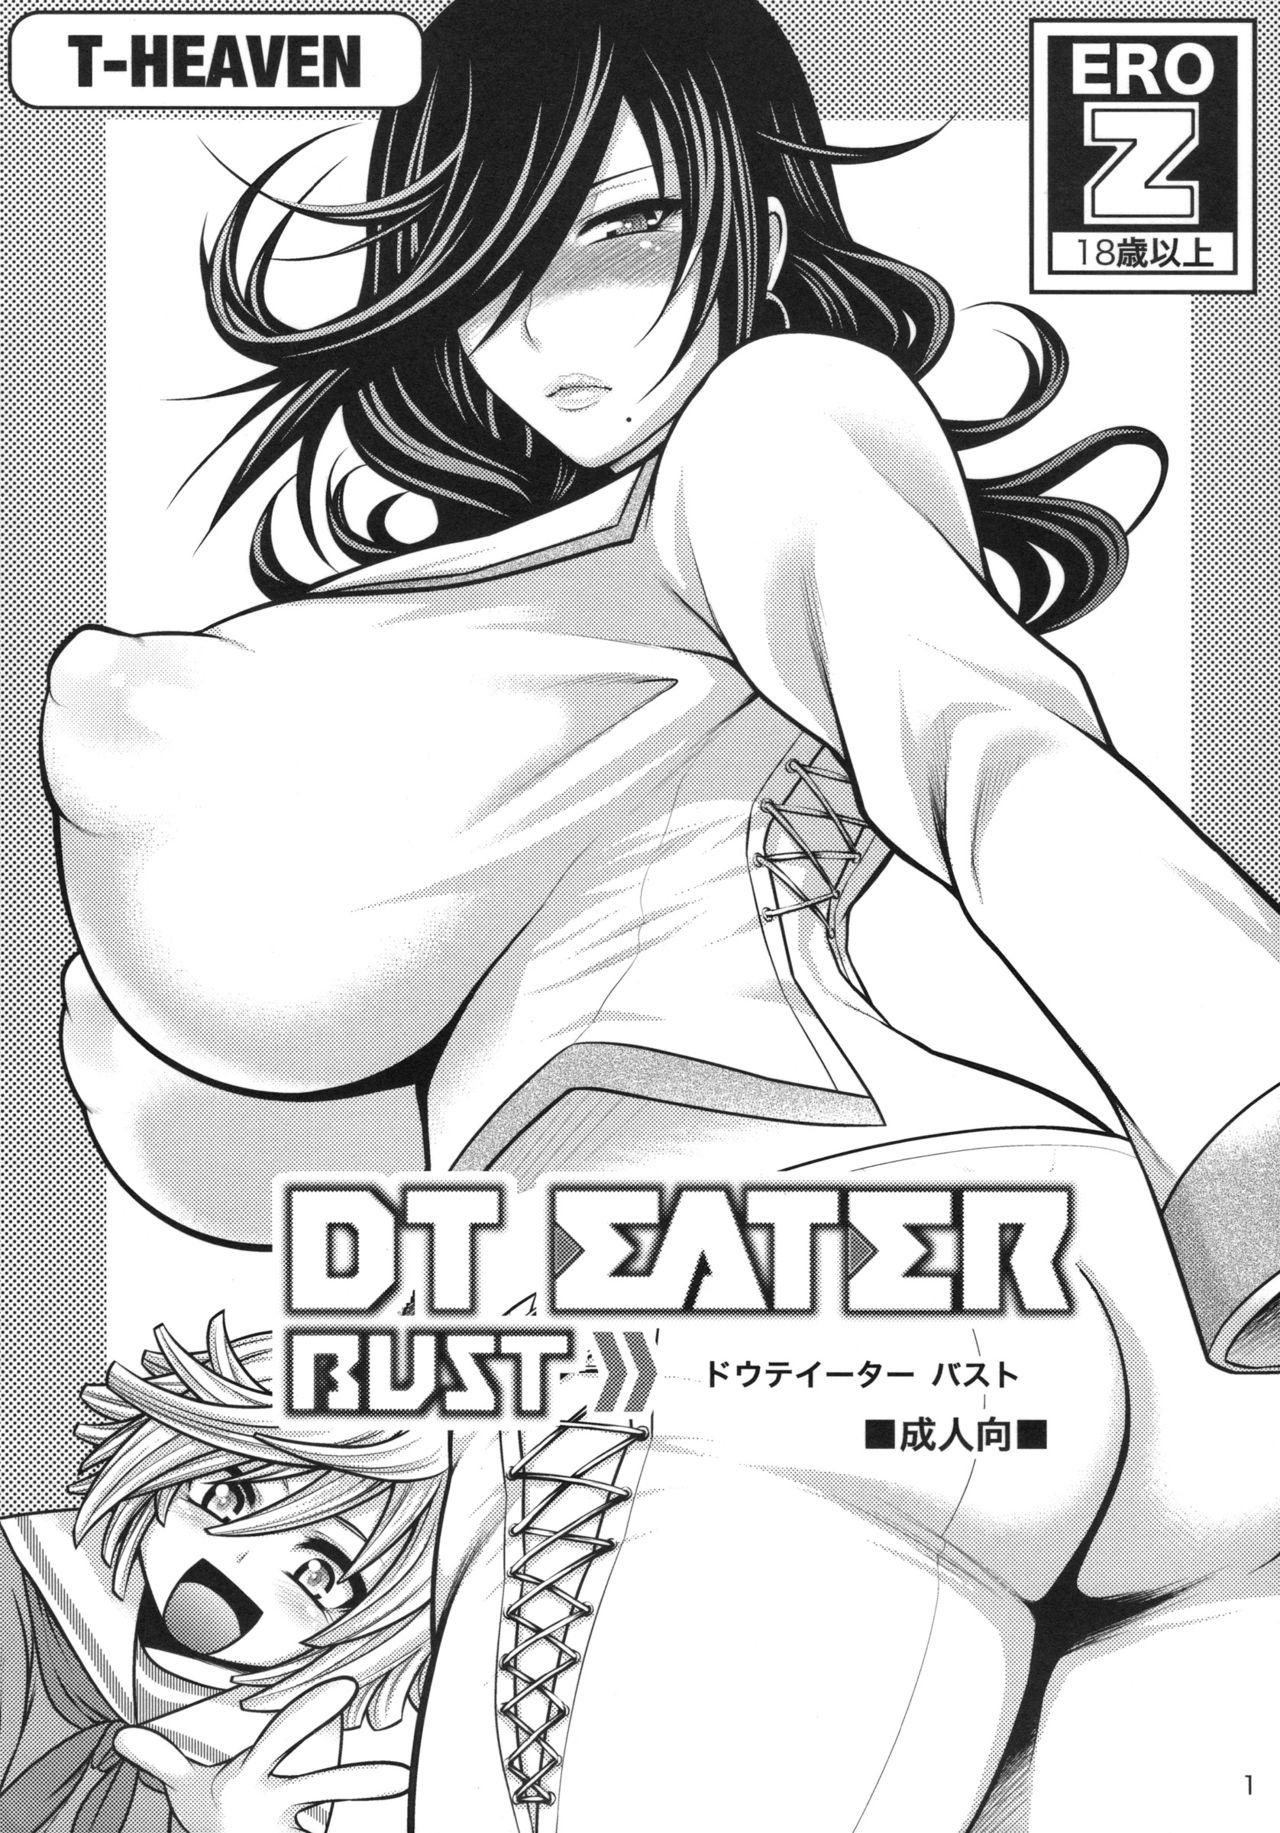 Soapy DT EATER BUST - God eater Short Hair - Page 1